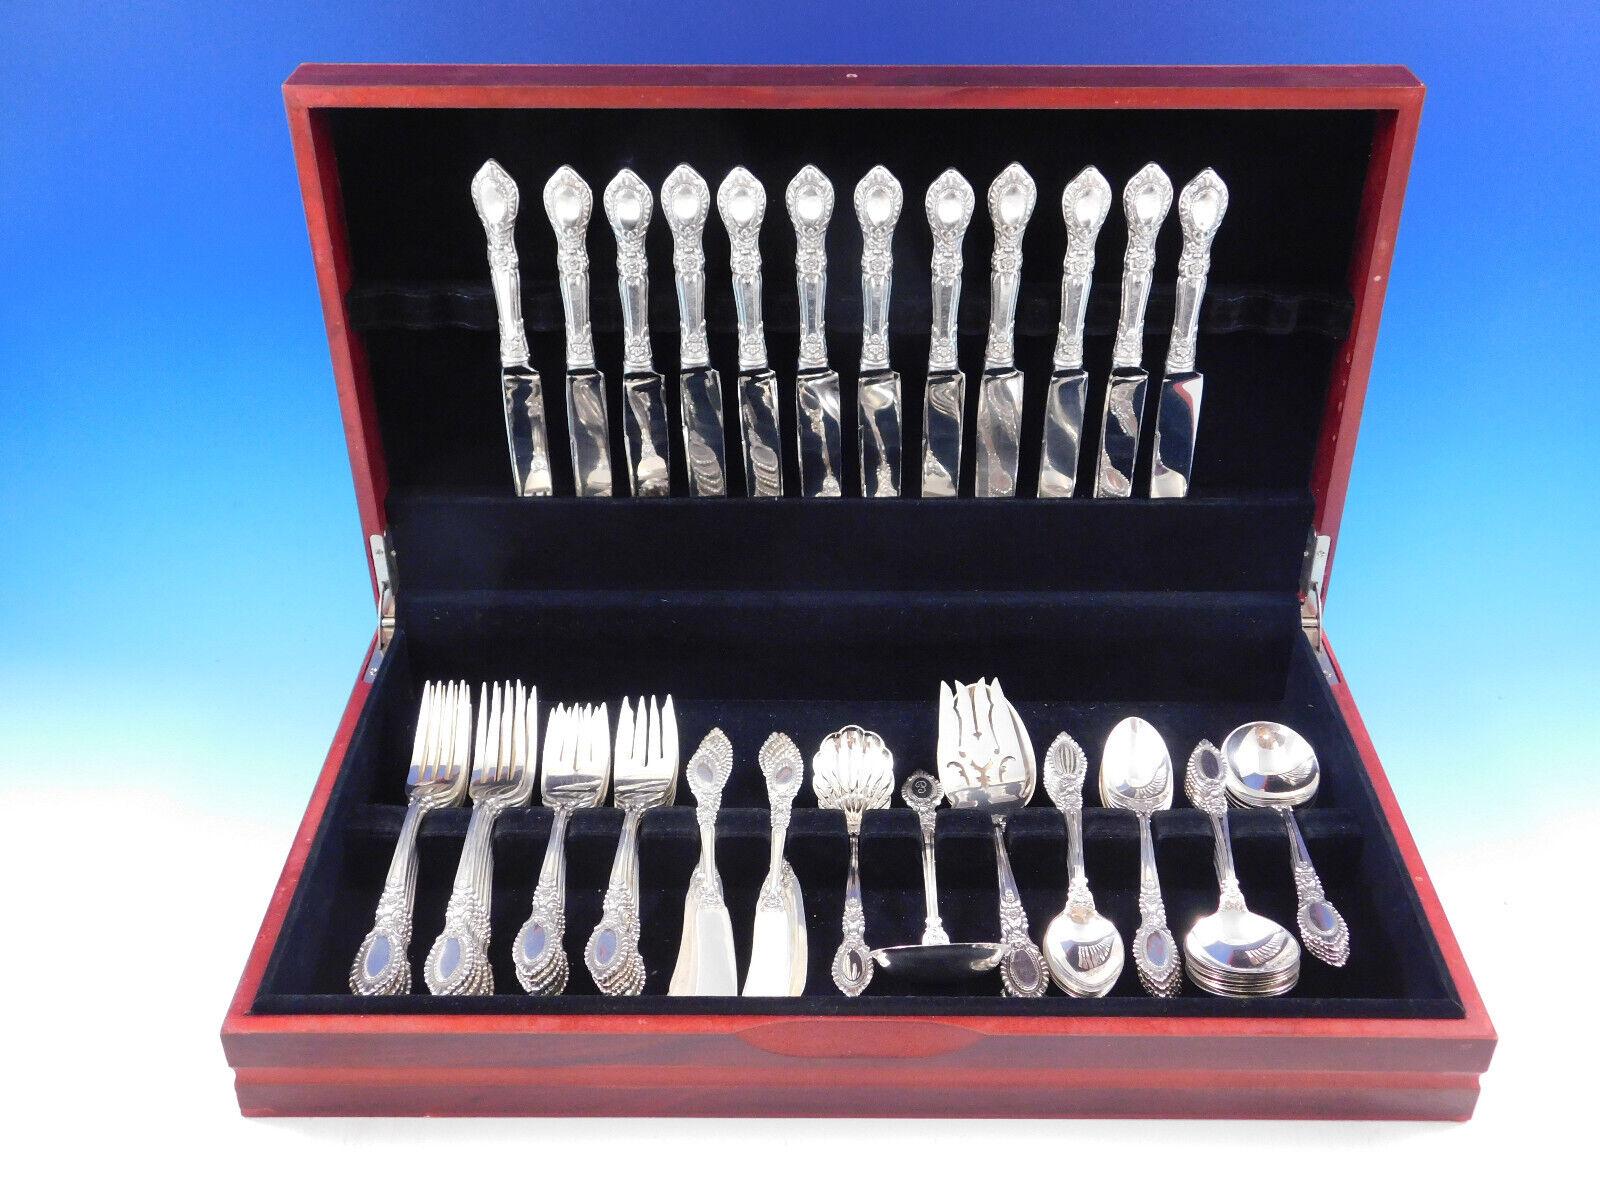 Heirloom quality Guildhall by Reed and Barton sterling silver flatware set, 76 pieces. This set includes:

12 Knives, 9